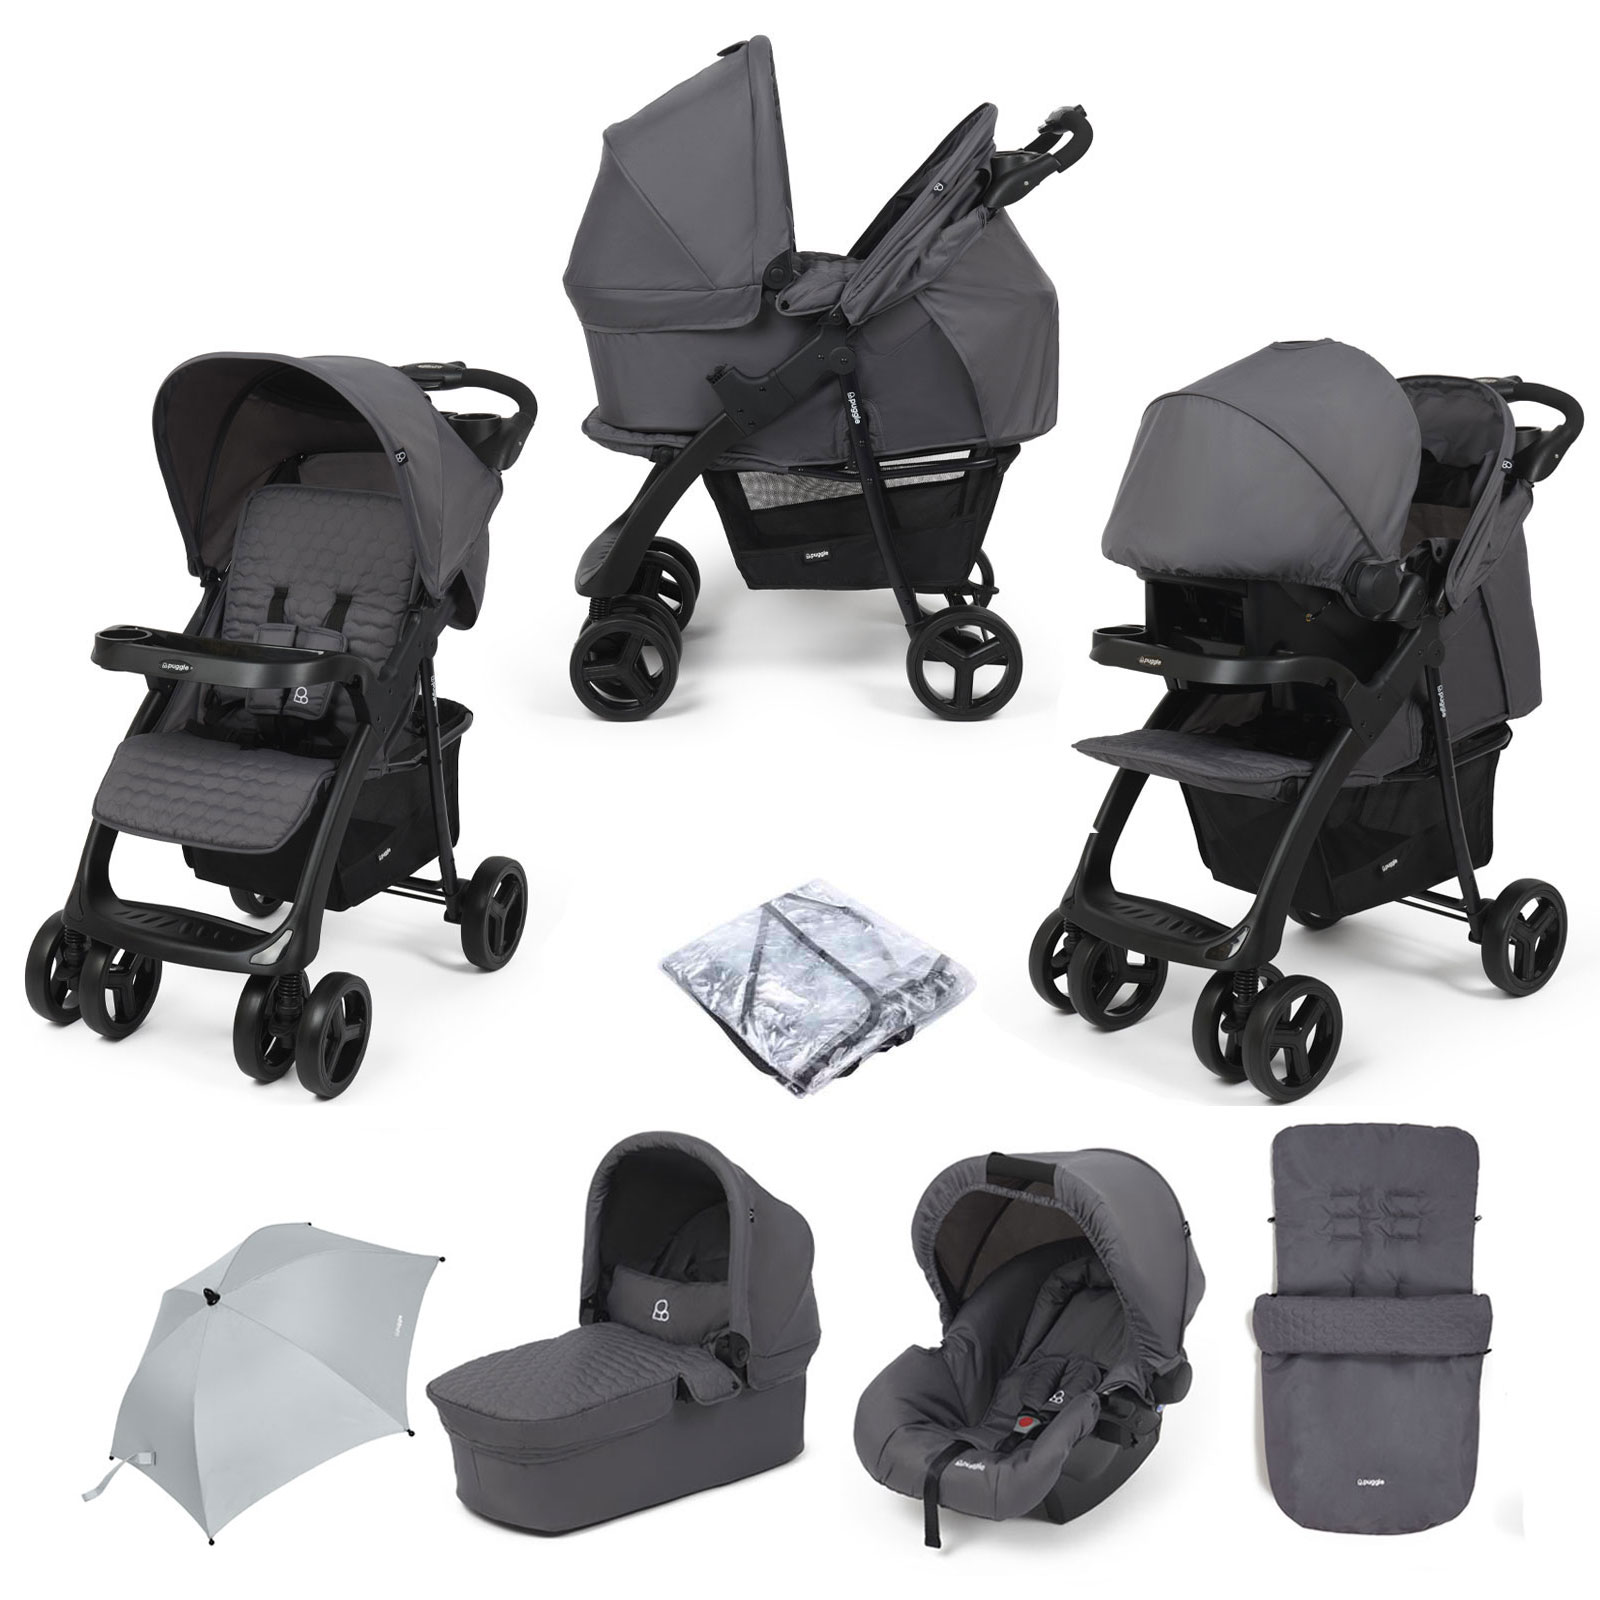 Puggle Denver Luxe 3in1 Travel System with Raincover, Footmuff & Parasol - Slate Grey